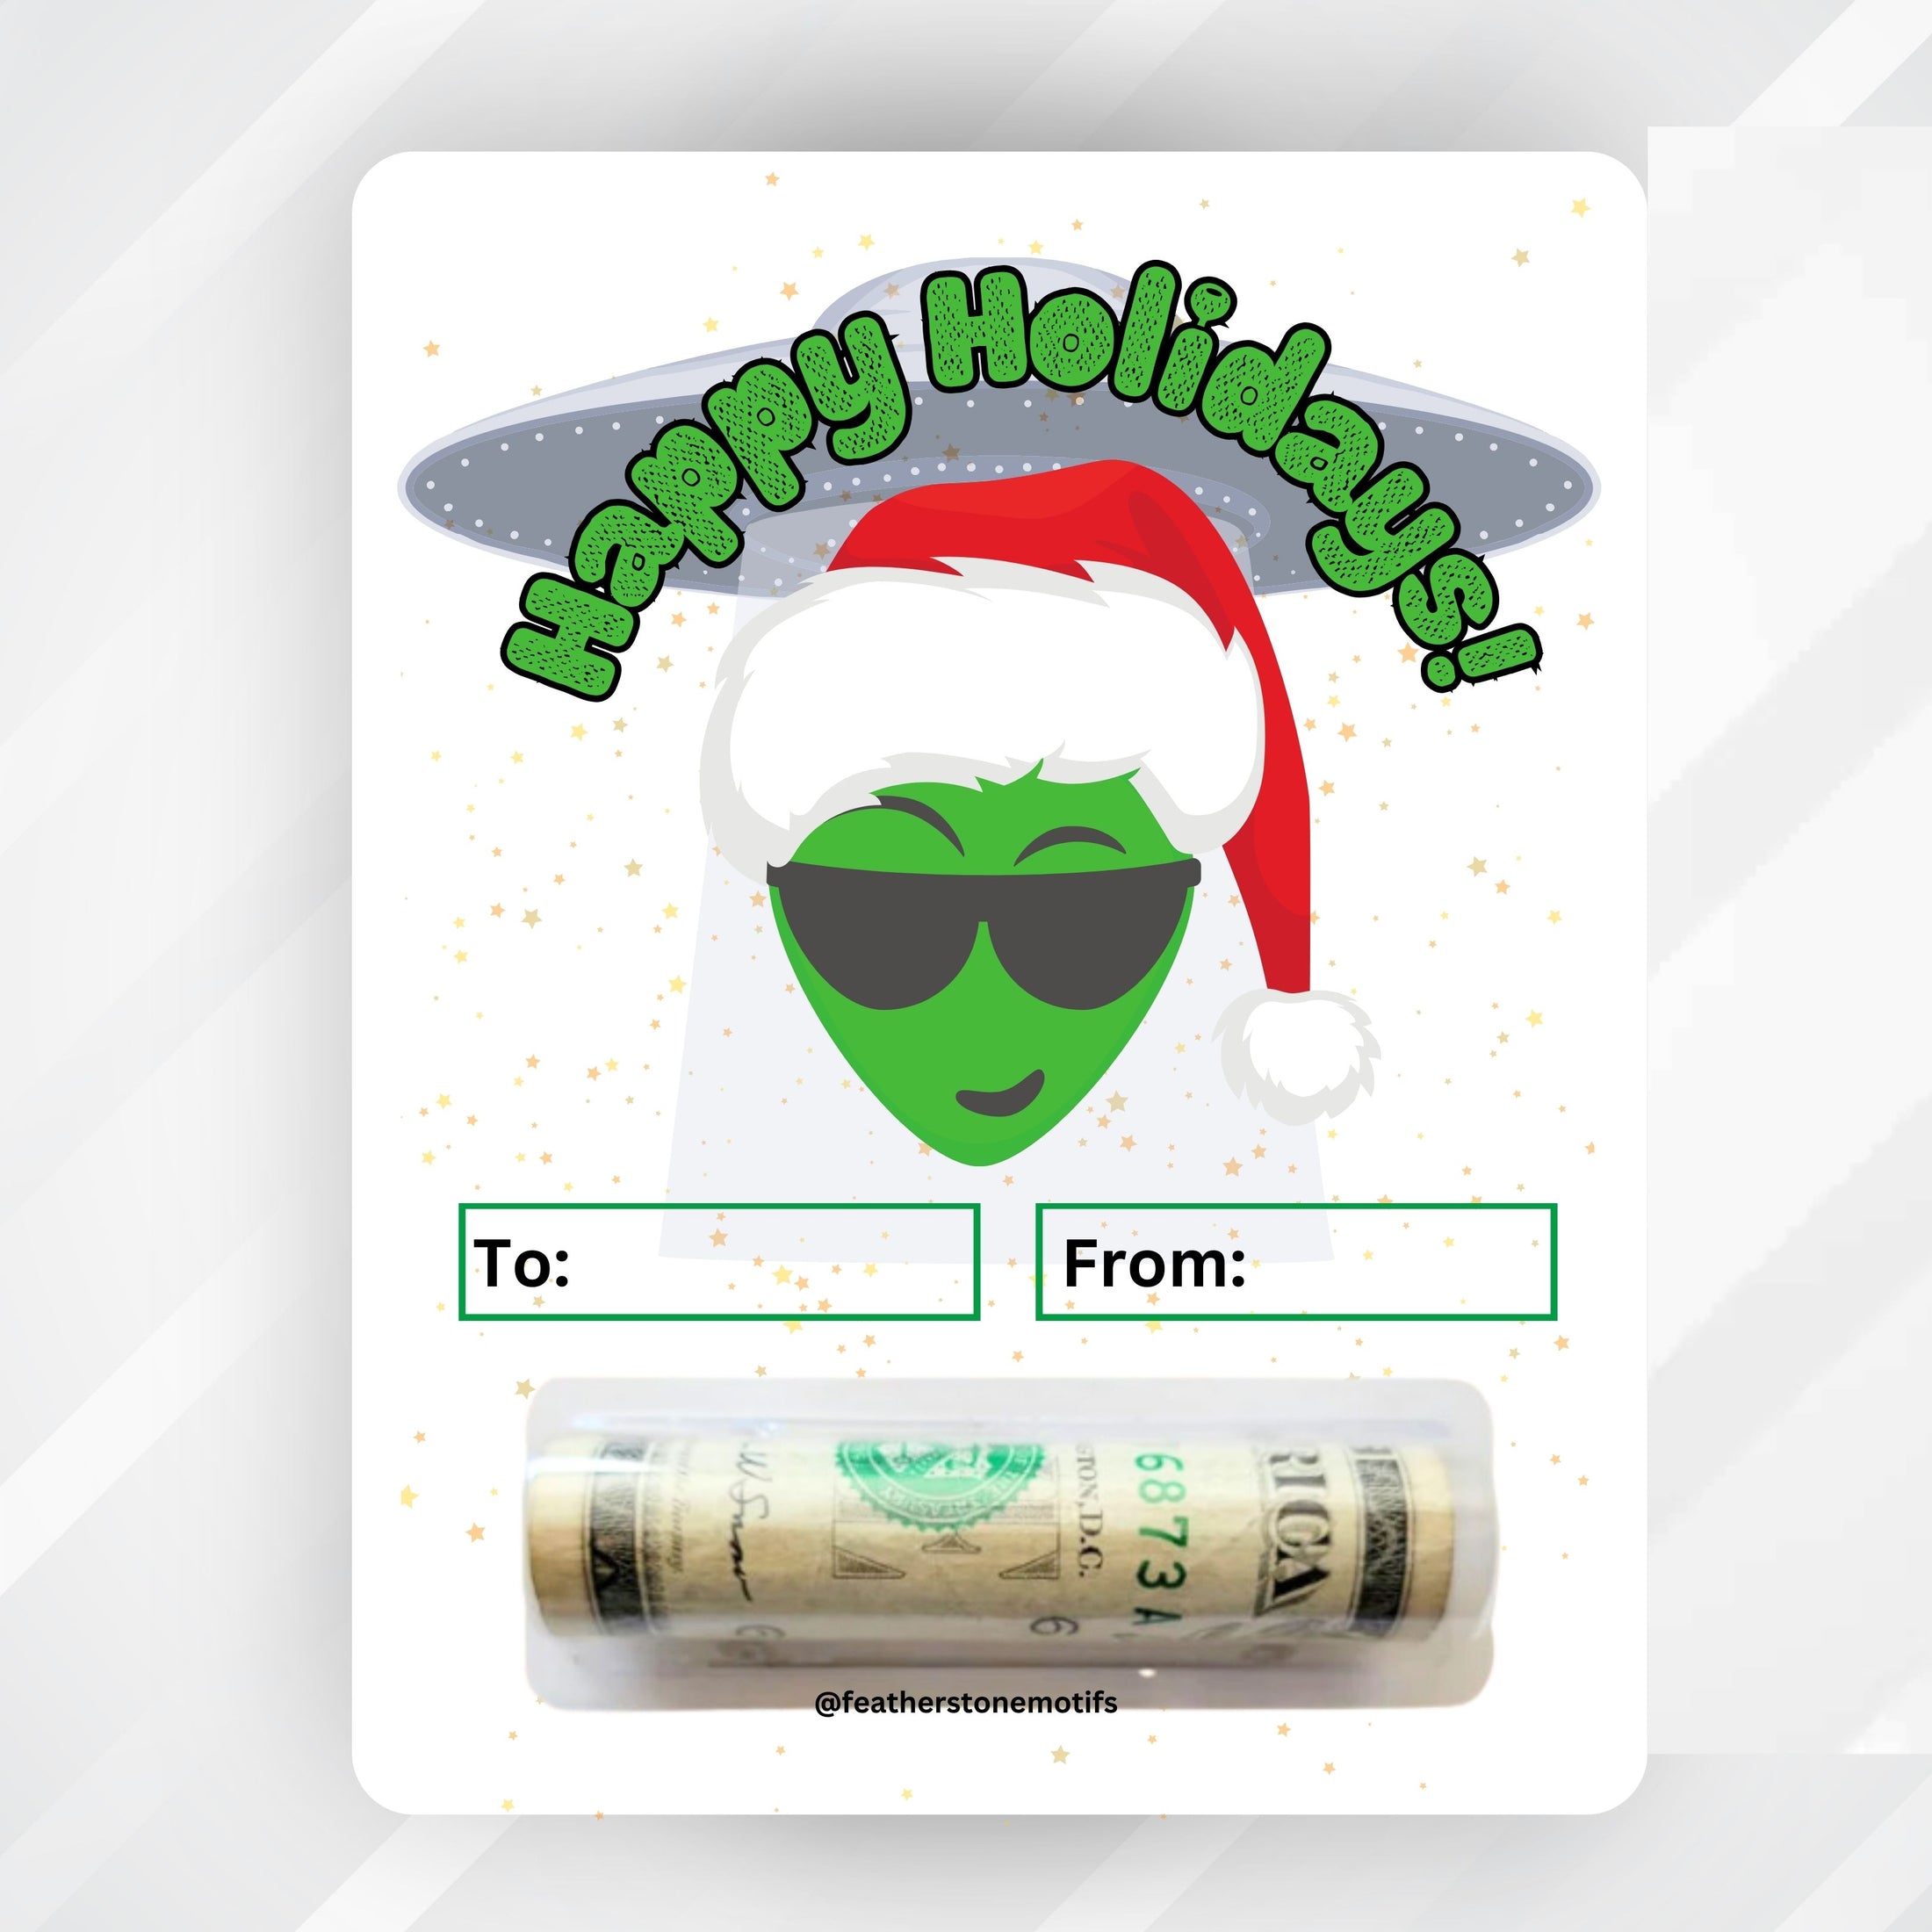 This image shows the Alien Holidays money card with money tube attached